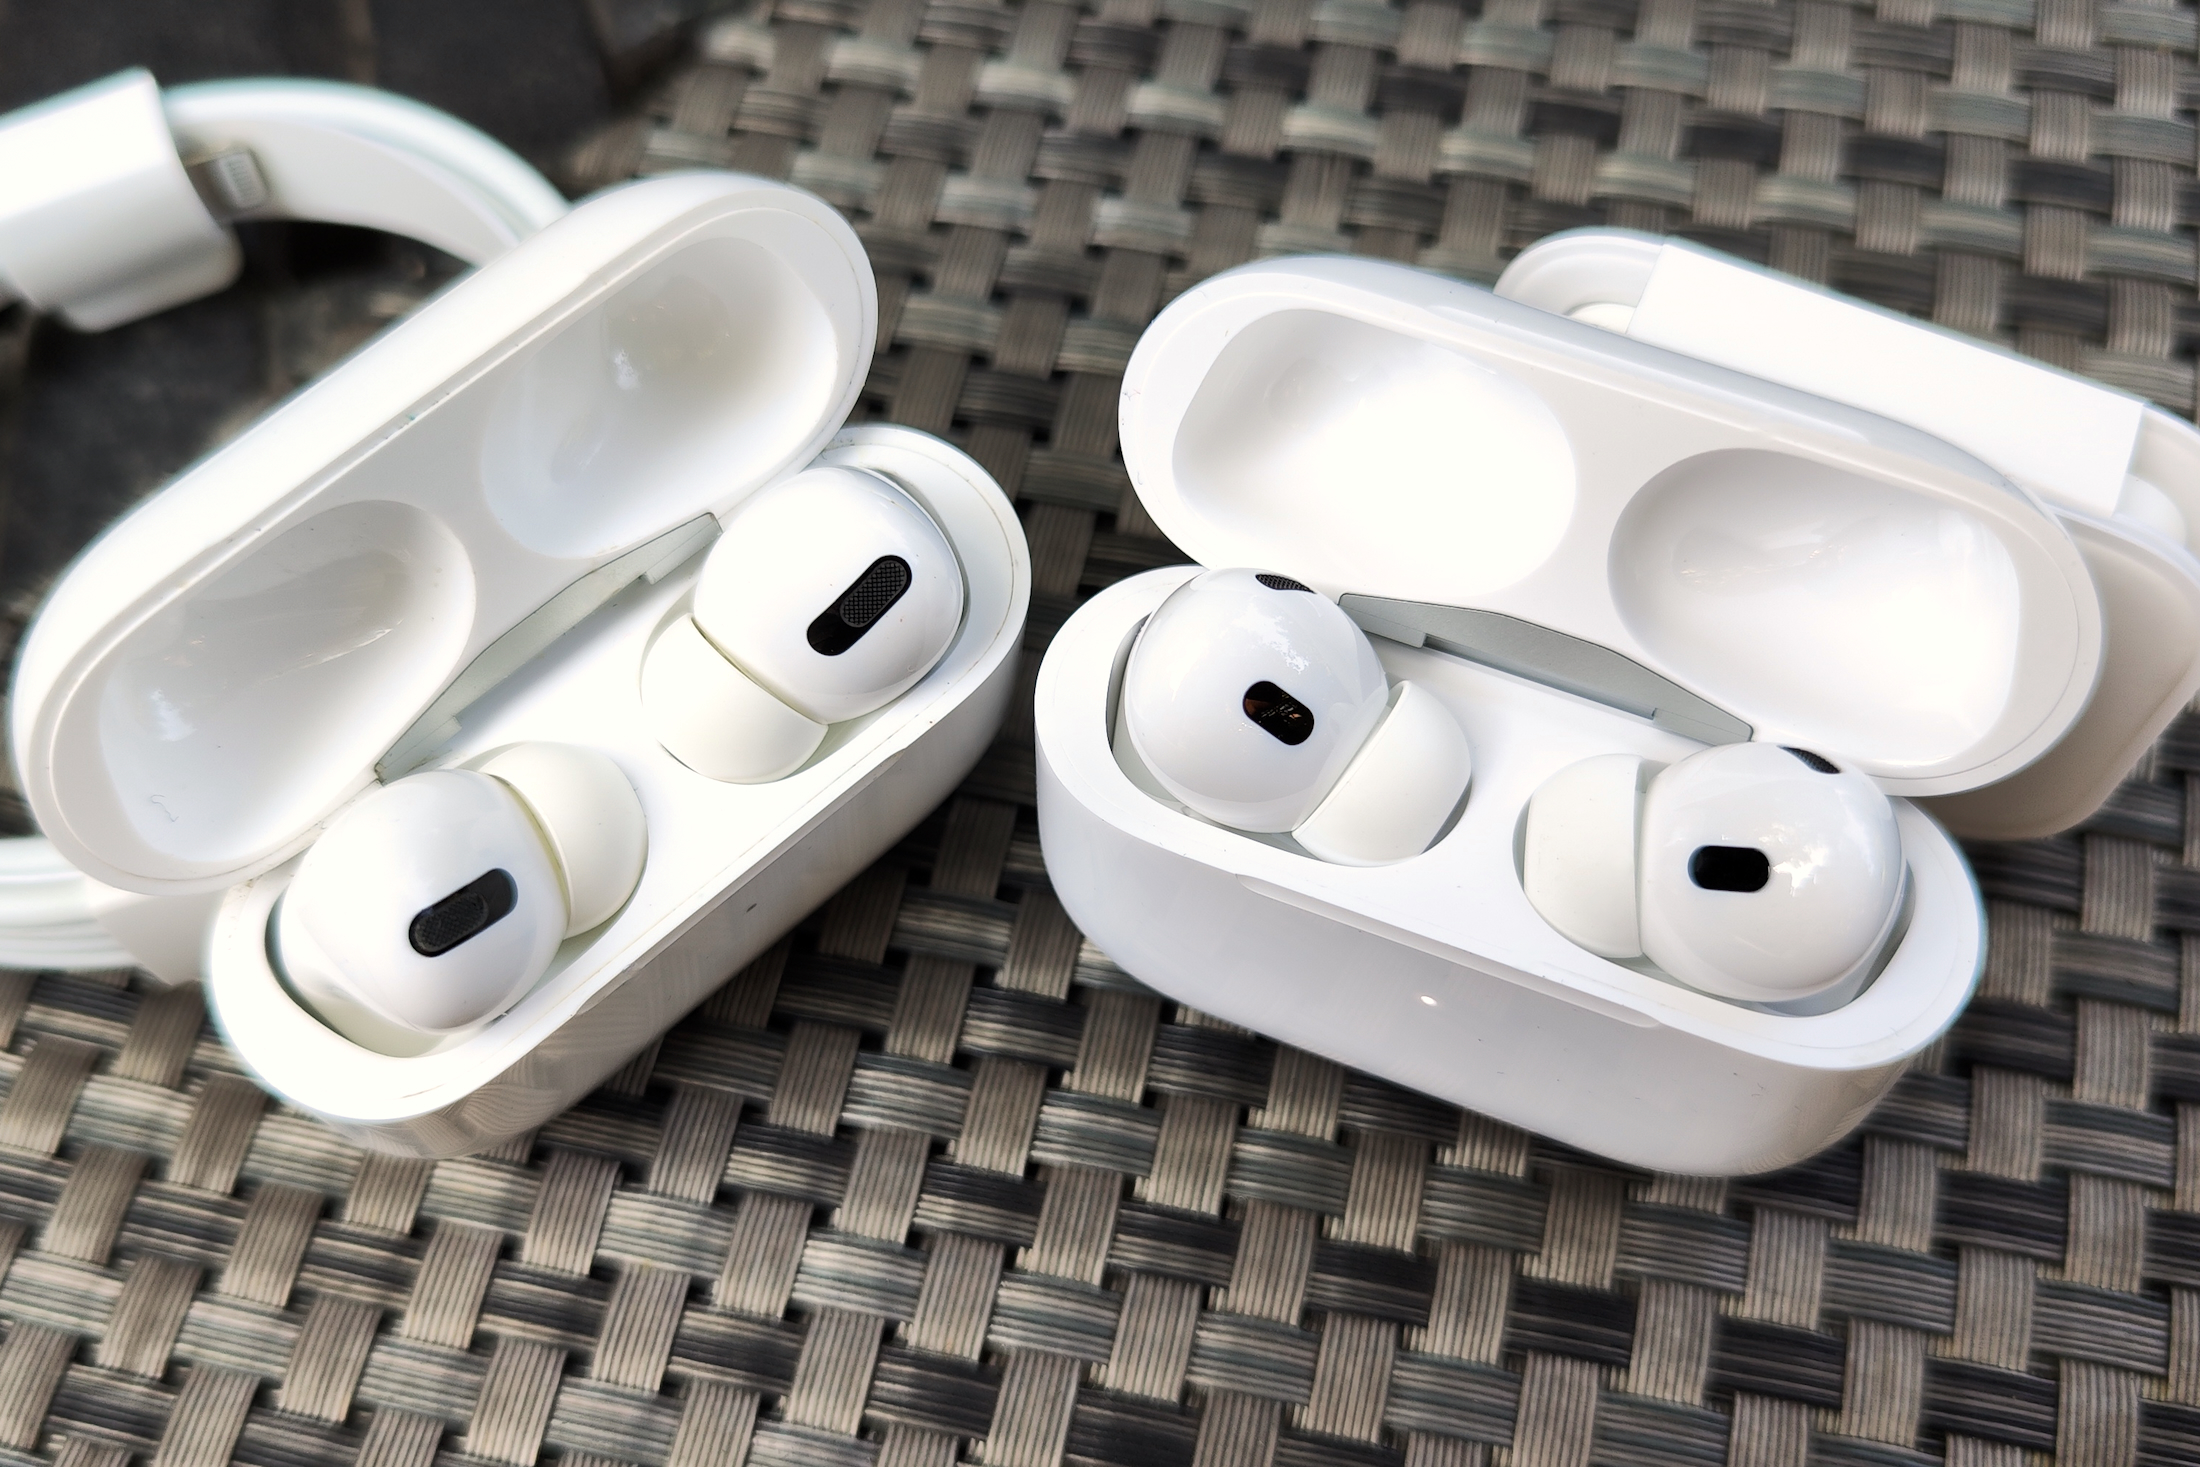 Apple AirPods Pro (1st generation) - full specs, details and review